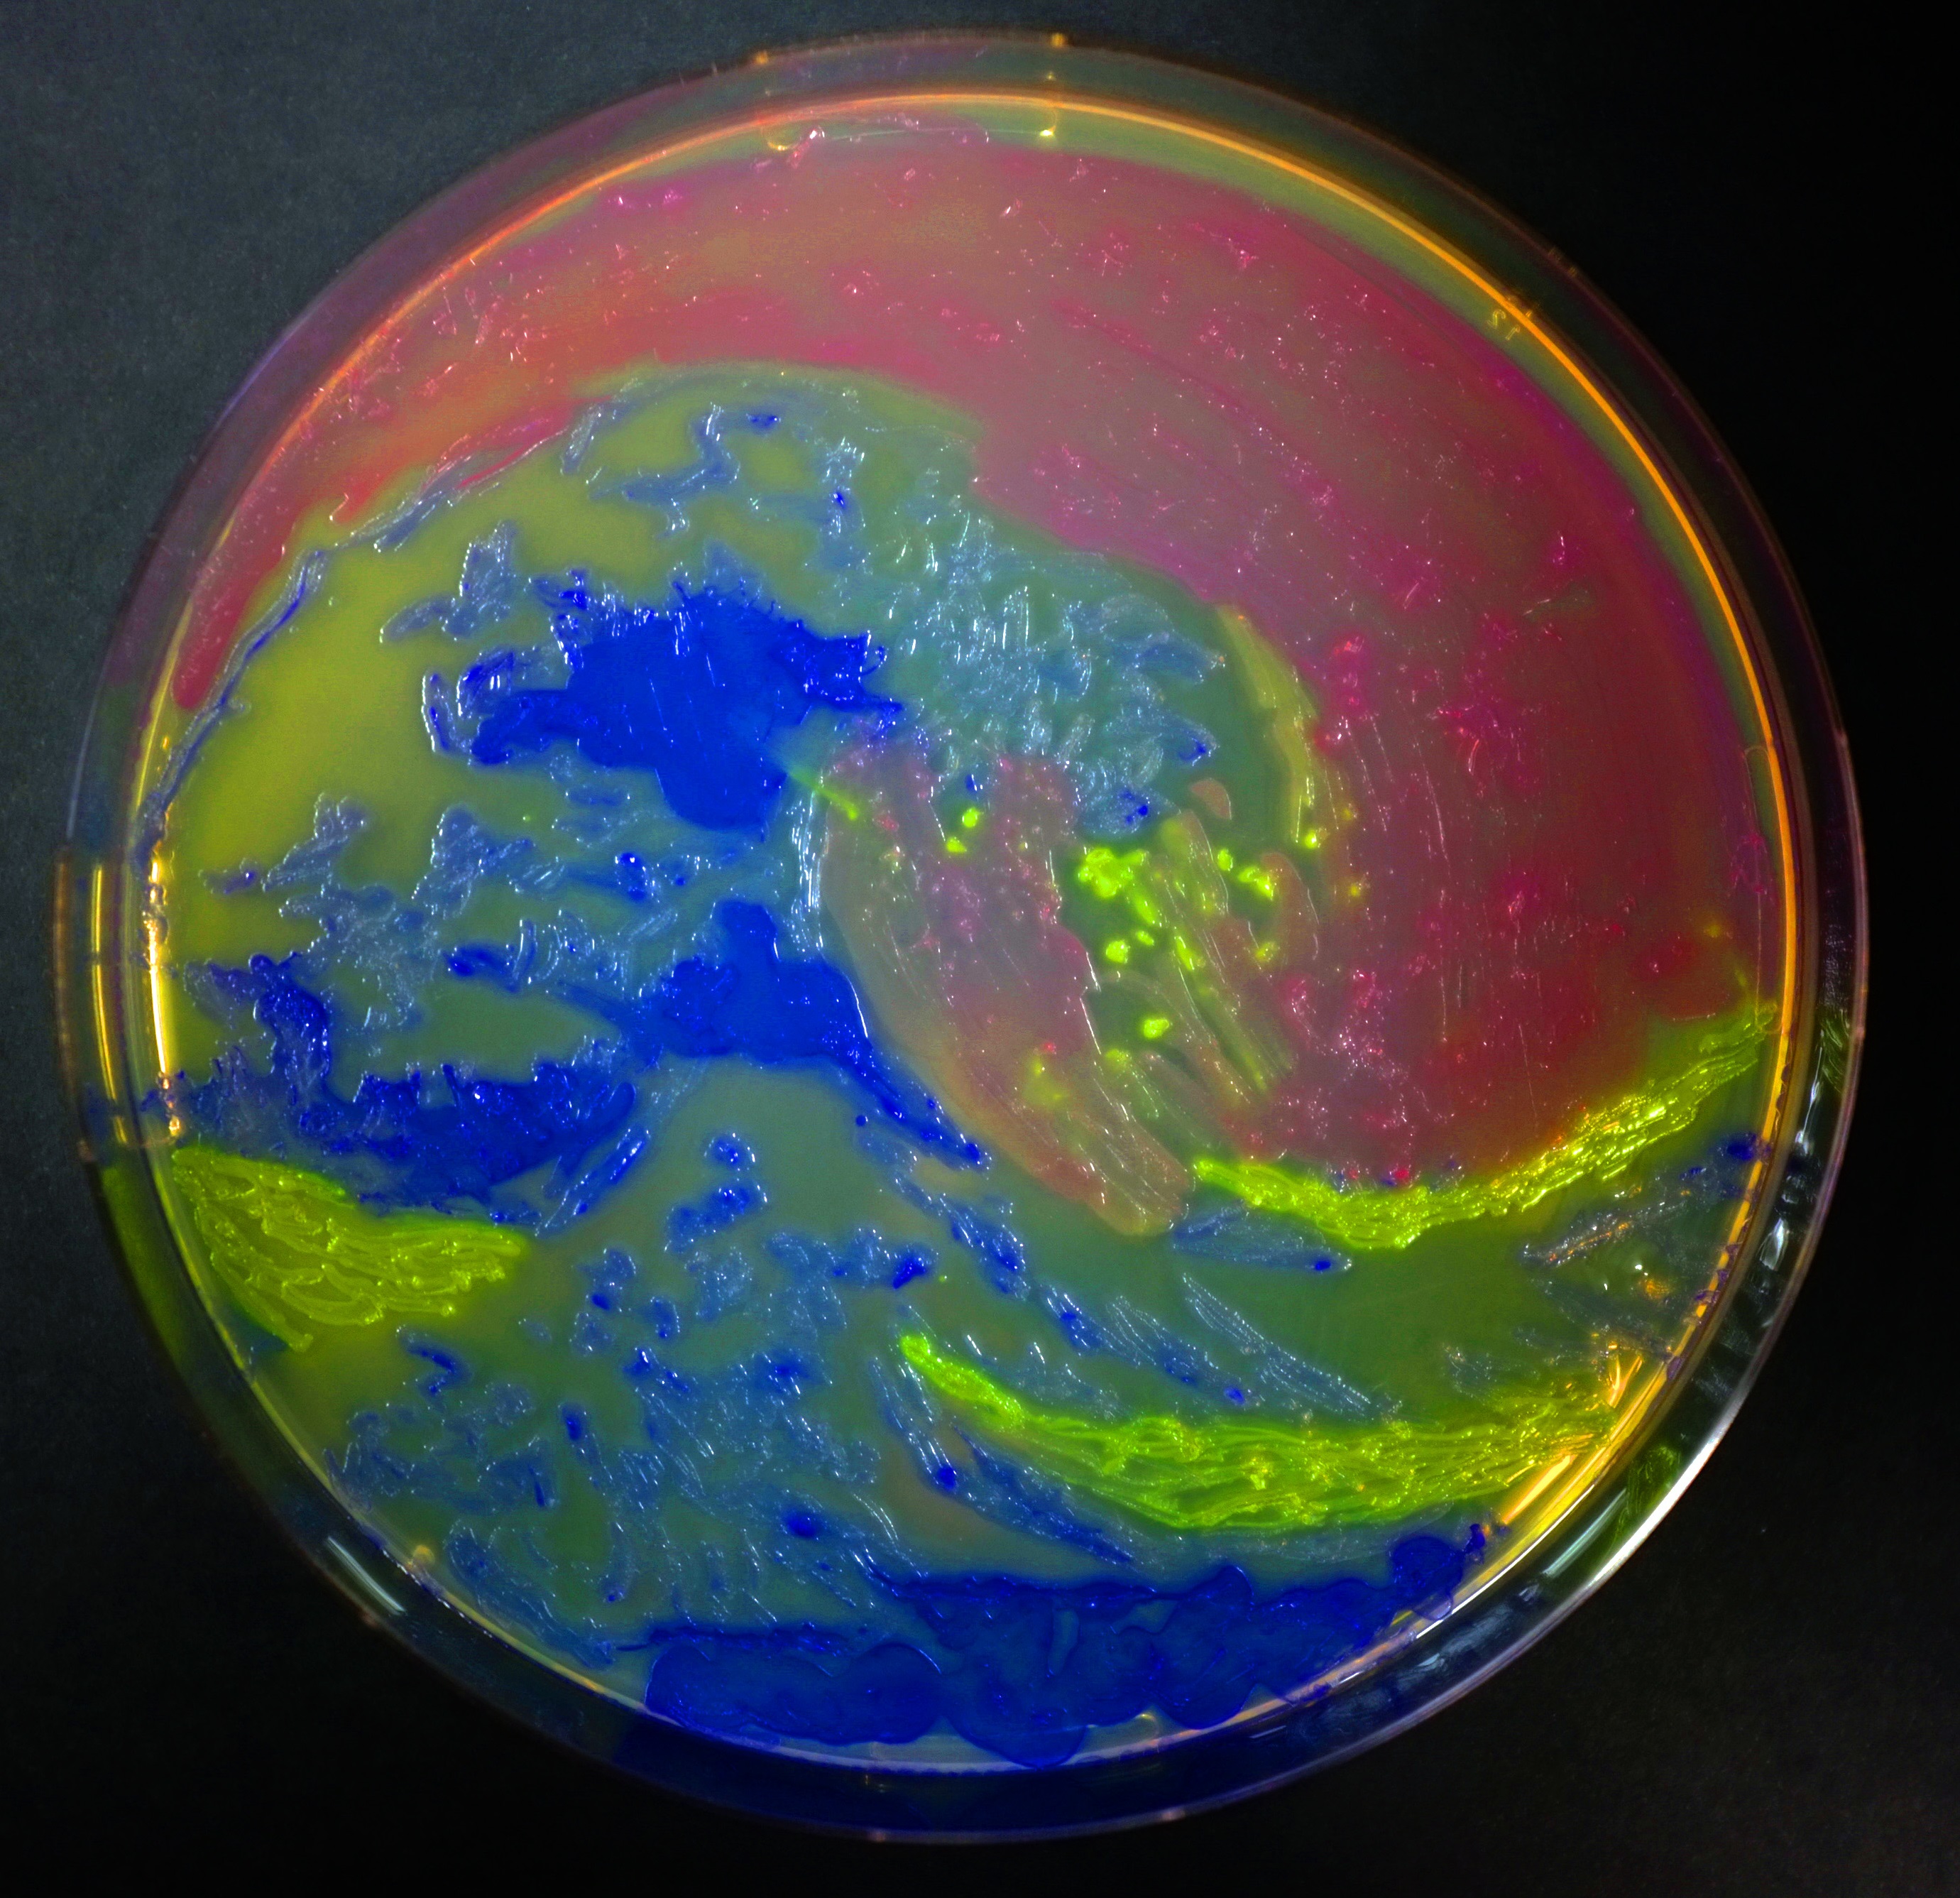 Hokusai's masterpiece, the Great Wave of Kanagawa, brought to you by pigmented and fluorescence E. coli.